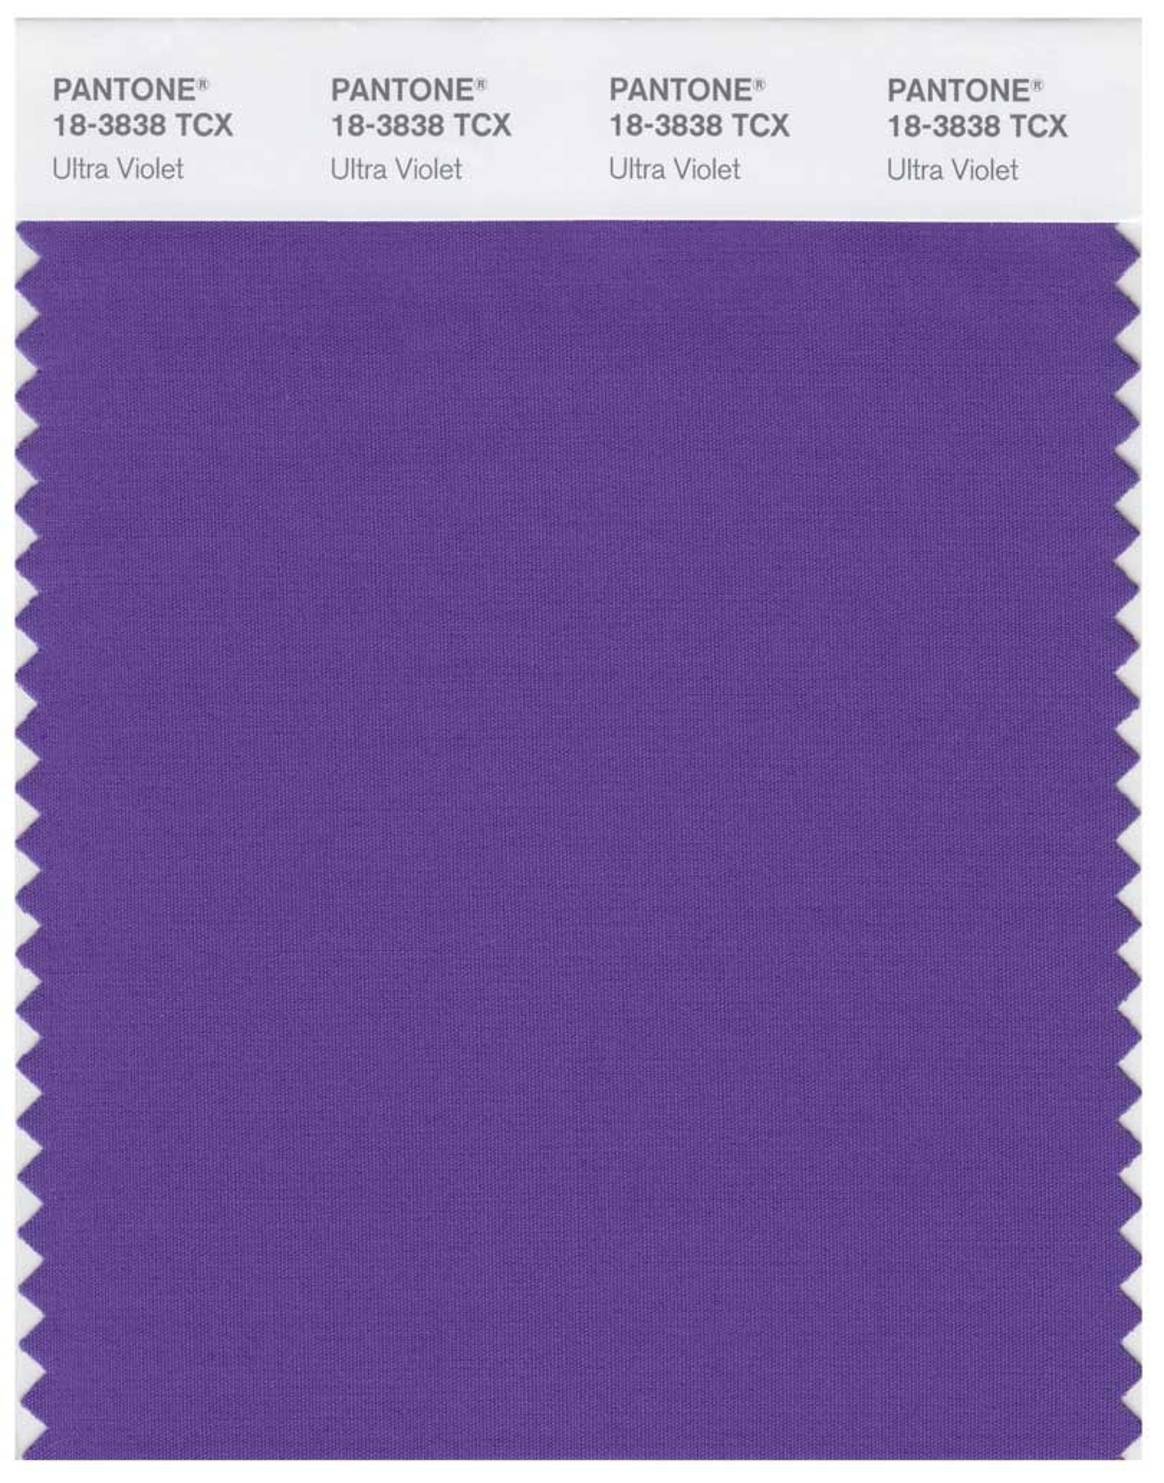 Pantone names Ultra Violet 2018 colour of the year